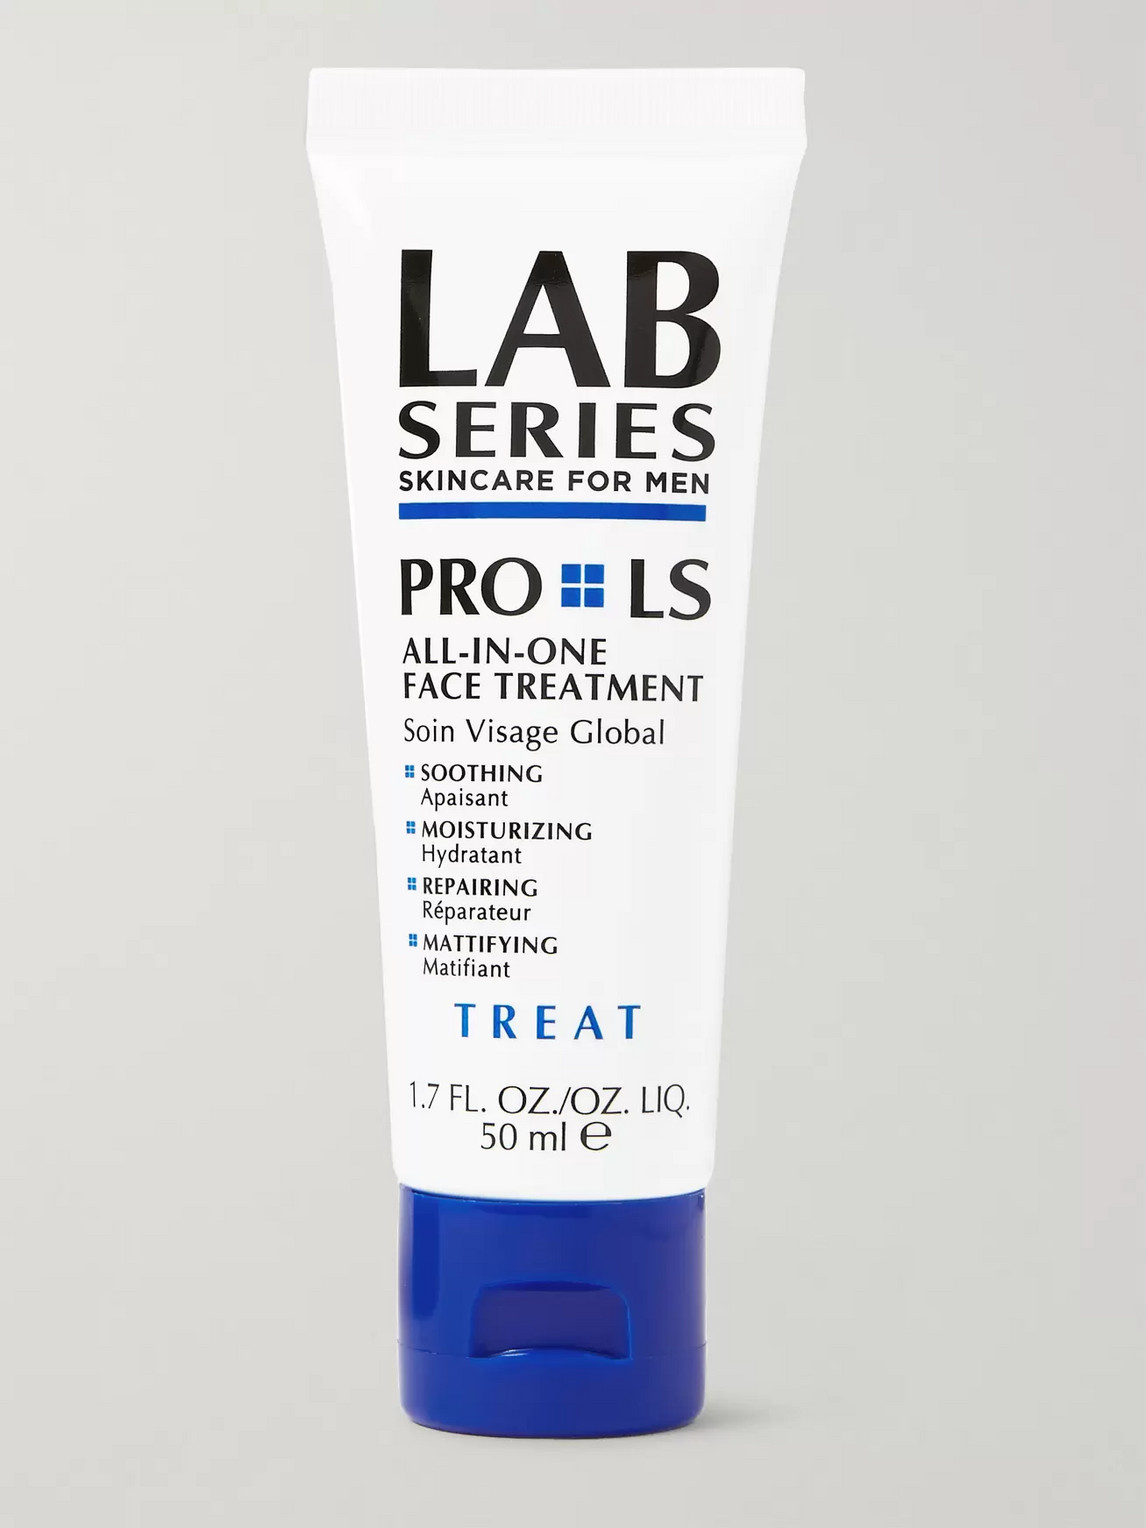 LAB SERIES PRO-LS ALL-IN-ONE FACE TREATMENT, 50ML